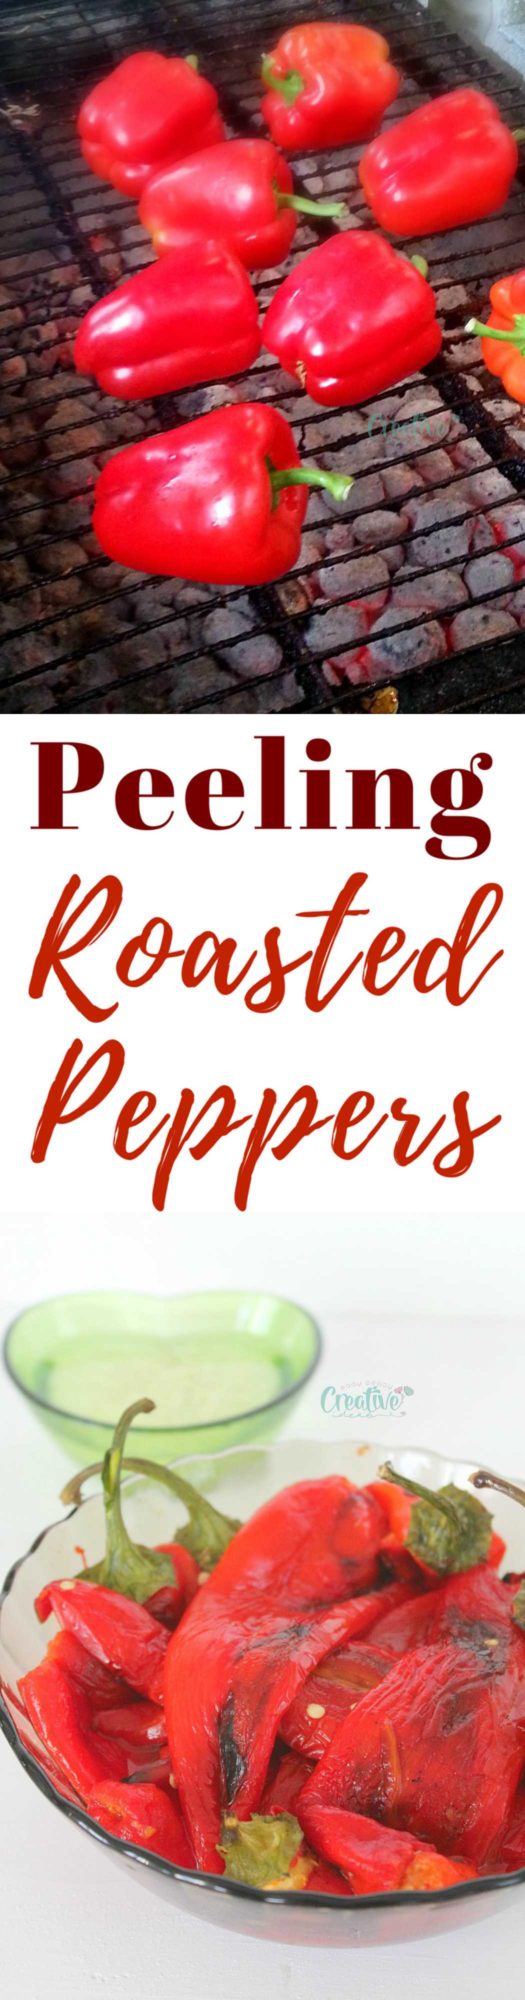 How to peel roasted peppers